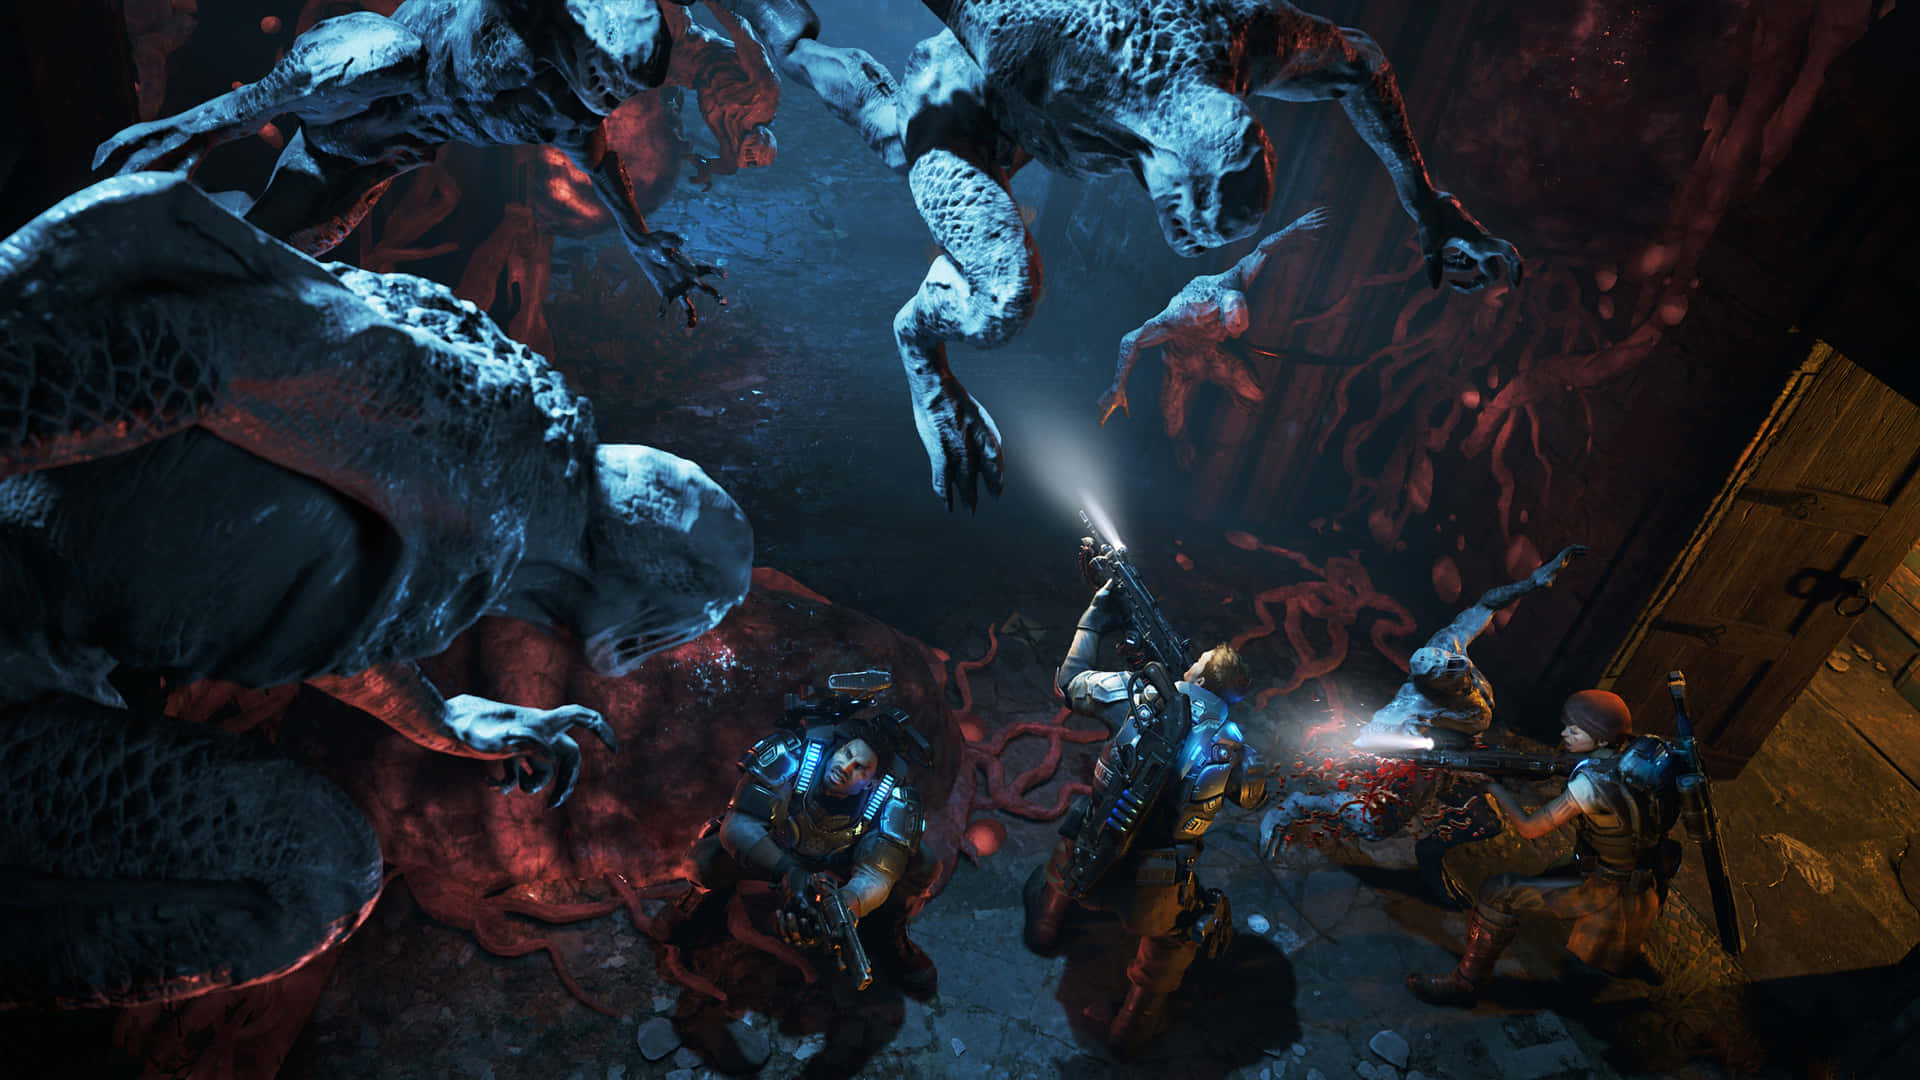 A Group Of People In A Dark Cave With A Monster